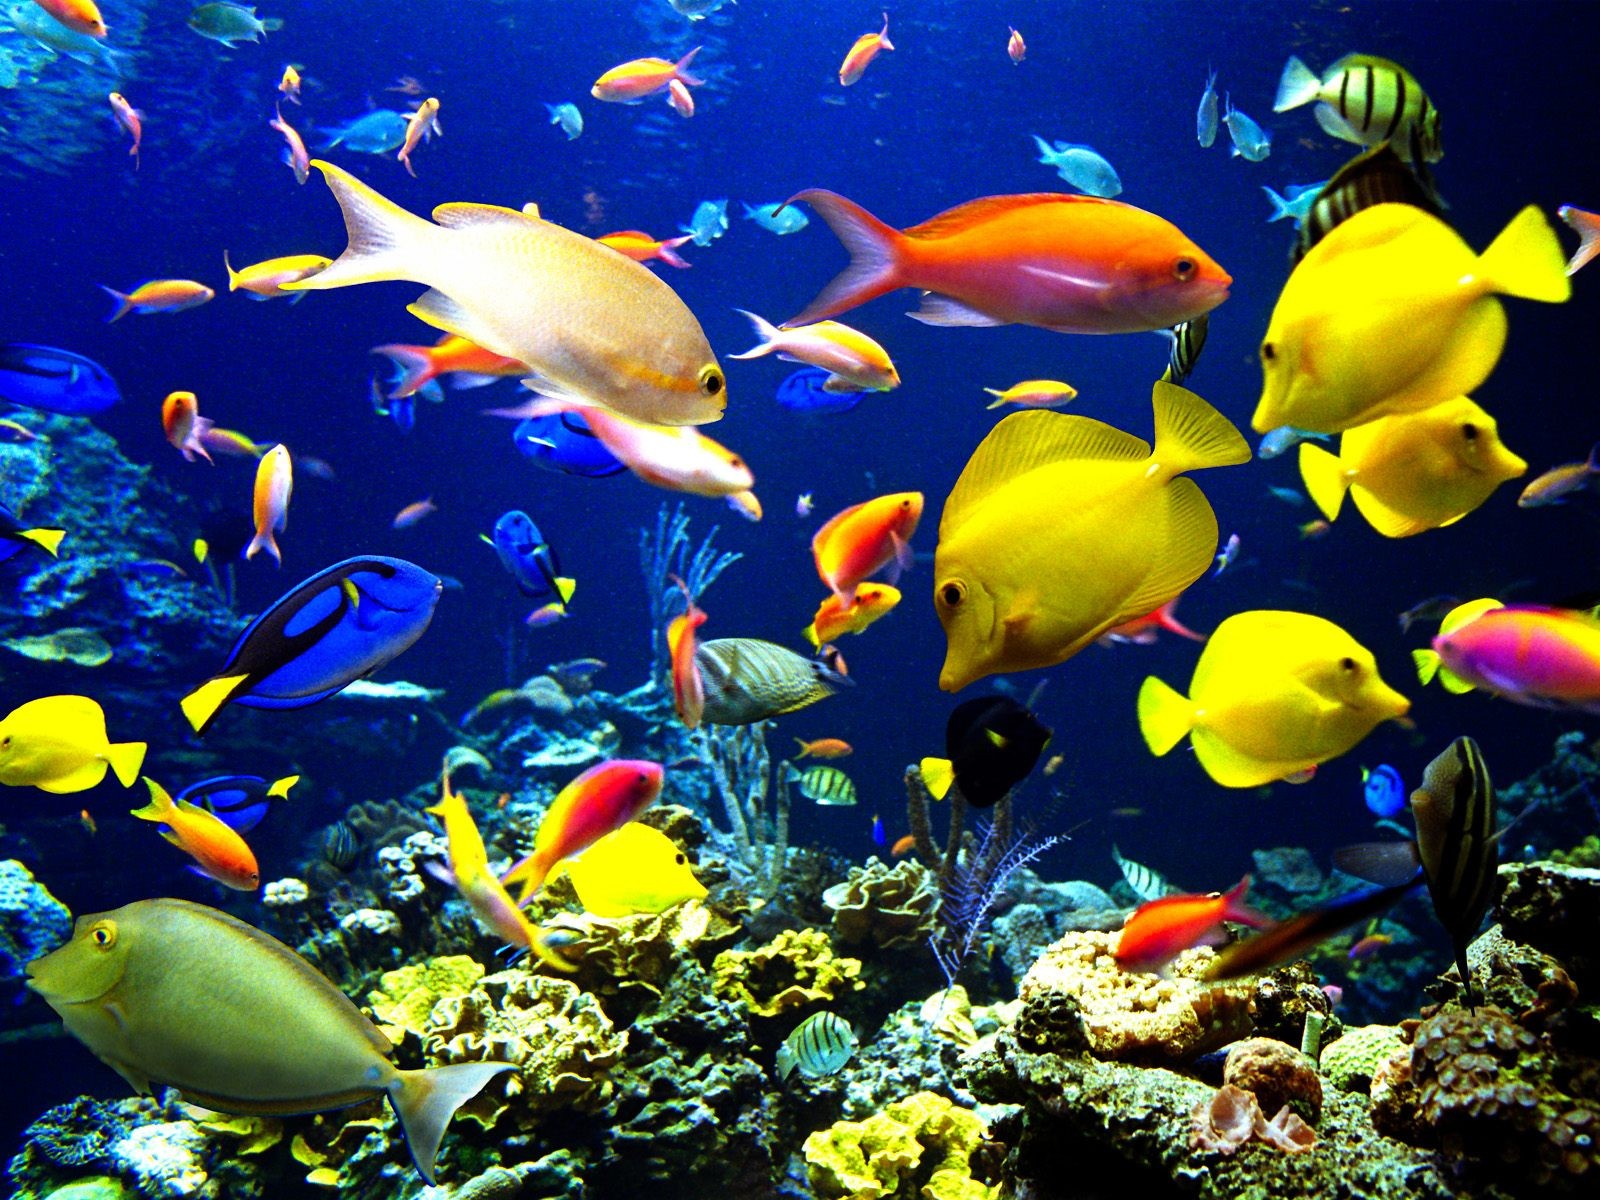 World's All Amazing Things, Pictures,Images And Wallpapers: Fish In Groups Underwater ...1600 x 1200